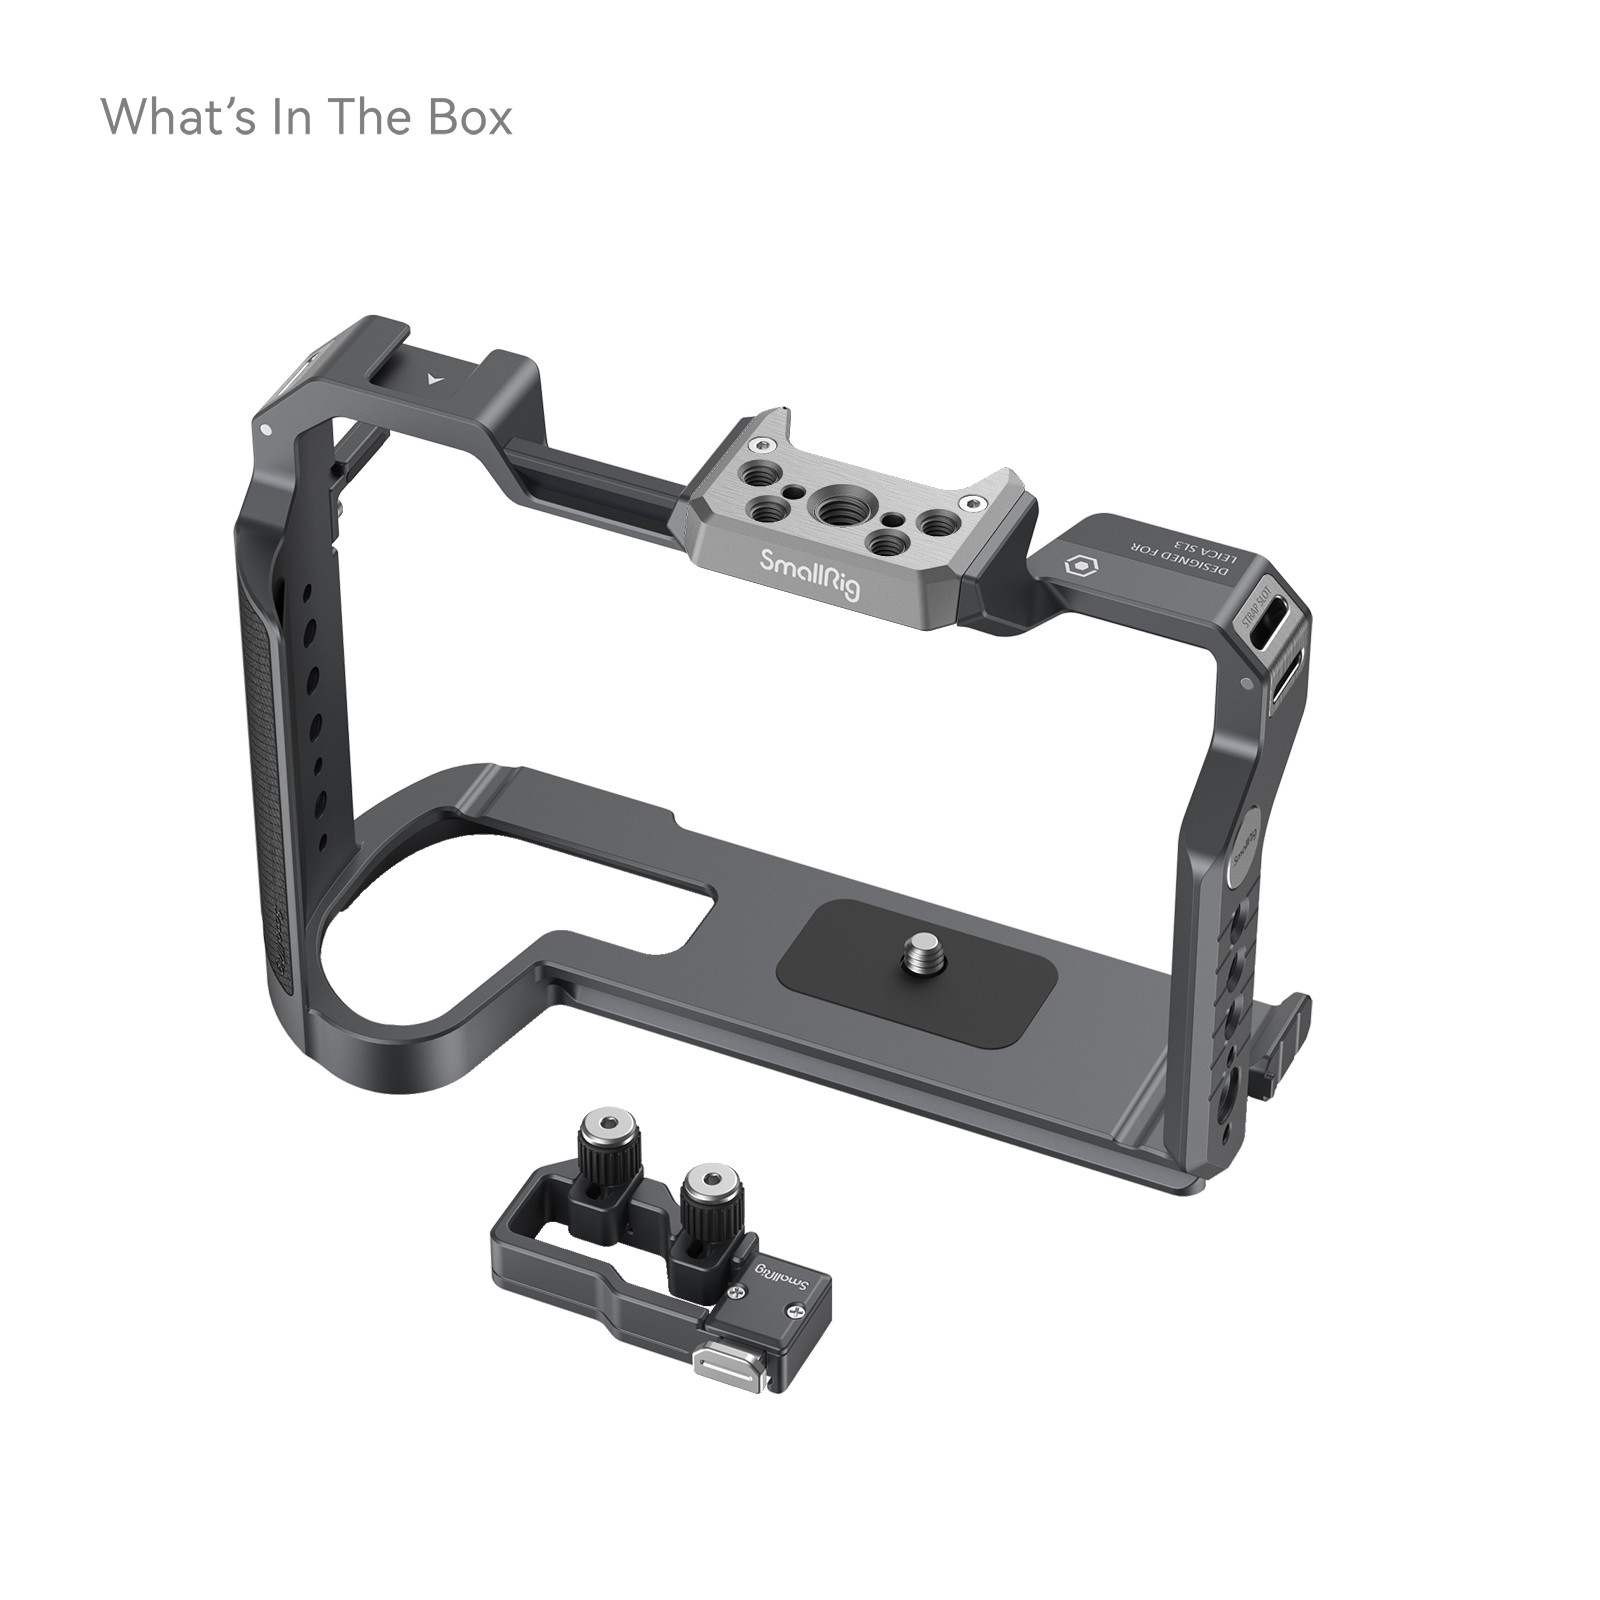 SmallRig Cage Kit for Leica SL3 4510